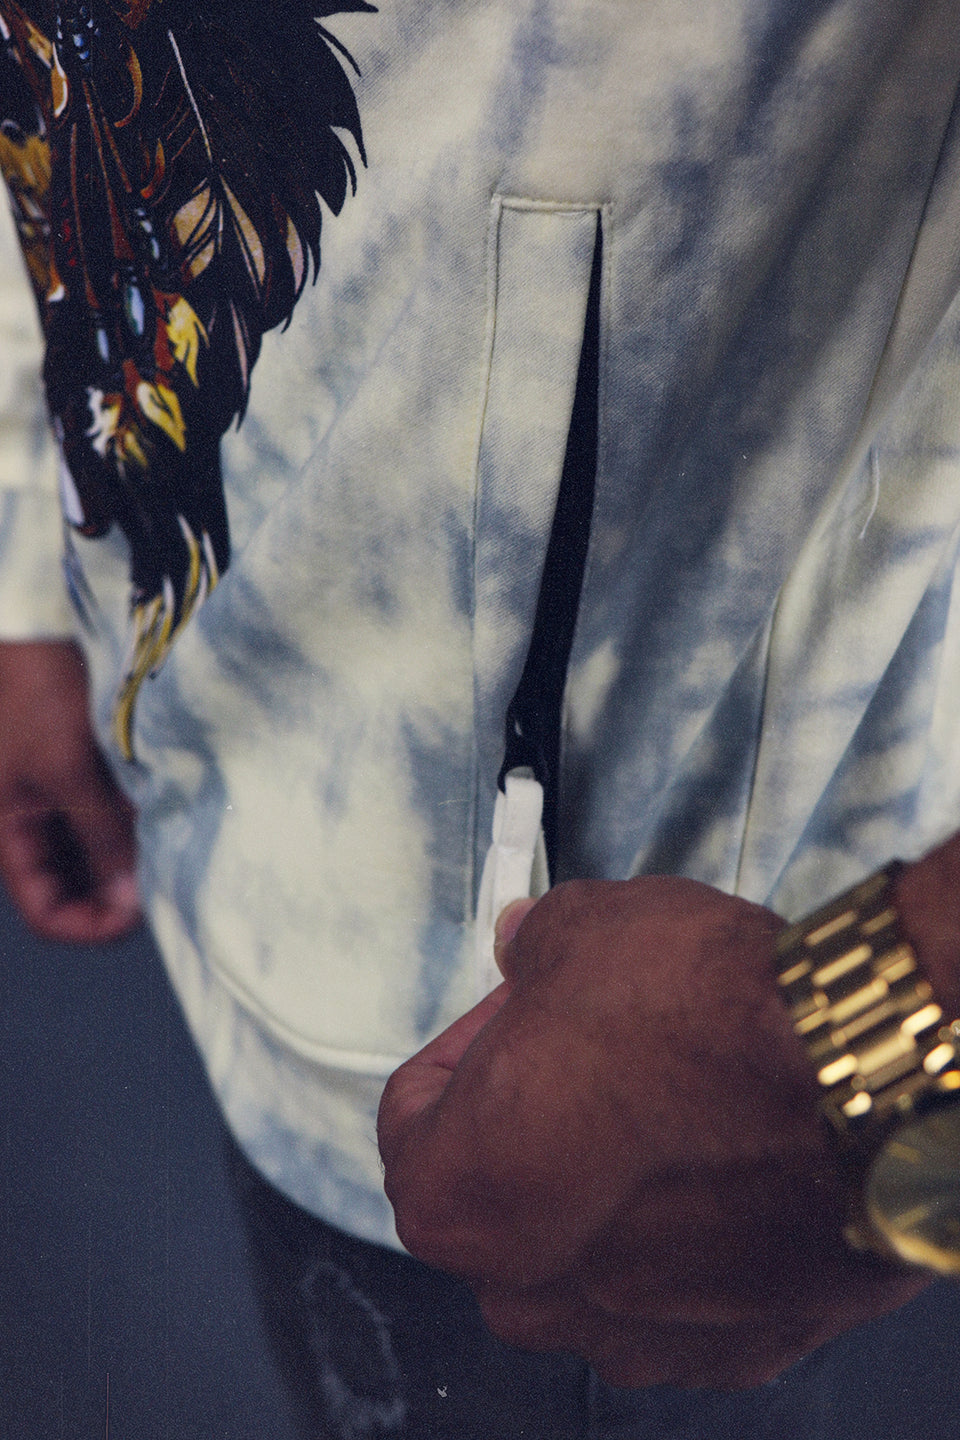 A close up of the zipper pocket on the Men's Chieftain Skull Hype Beast Streetwear Sequin Graphic Crewneck Sweatshirt